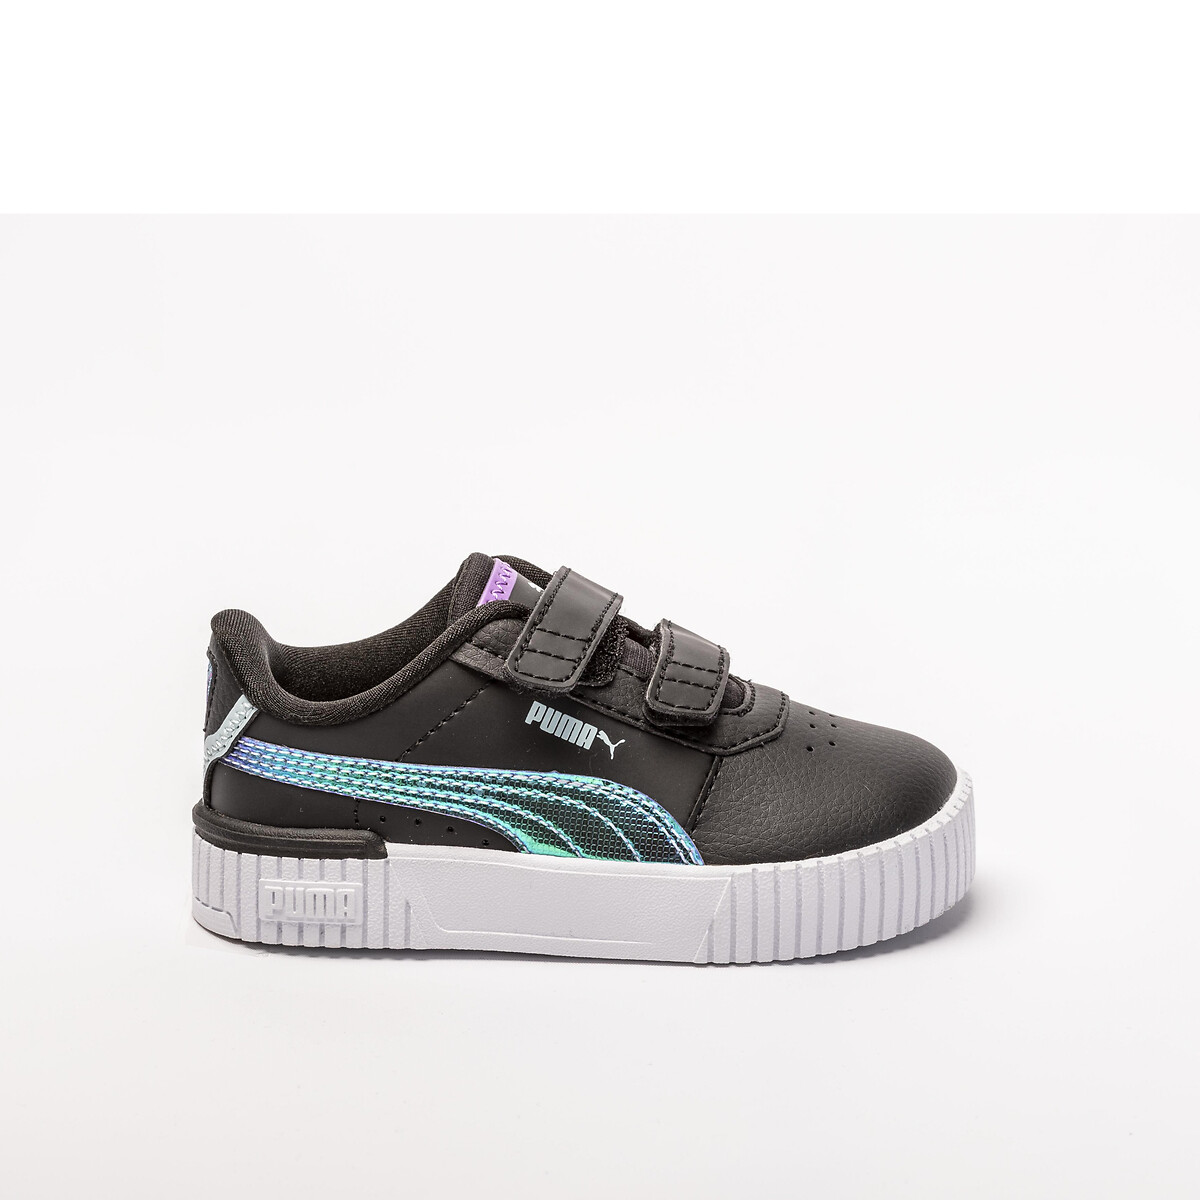 Image of Kids Carina 2.0 Deep Dive Trainers with Touch 'n' Close Fastening